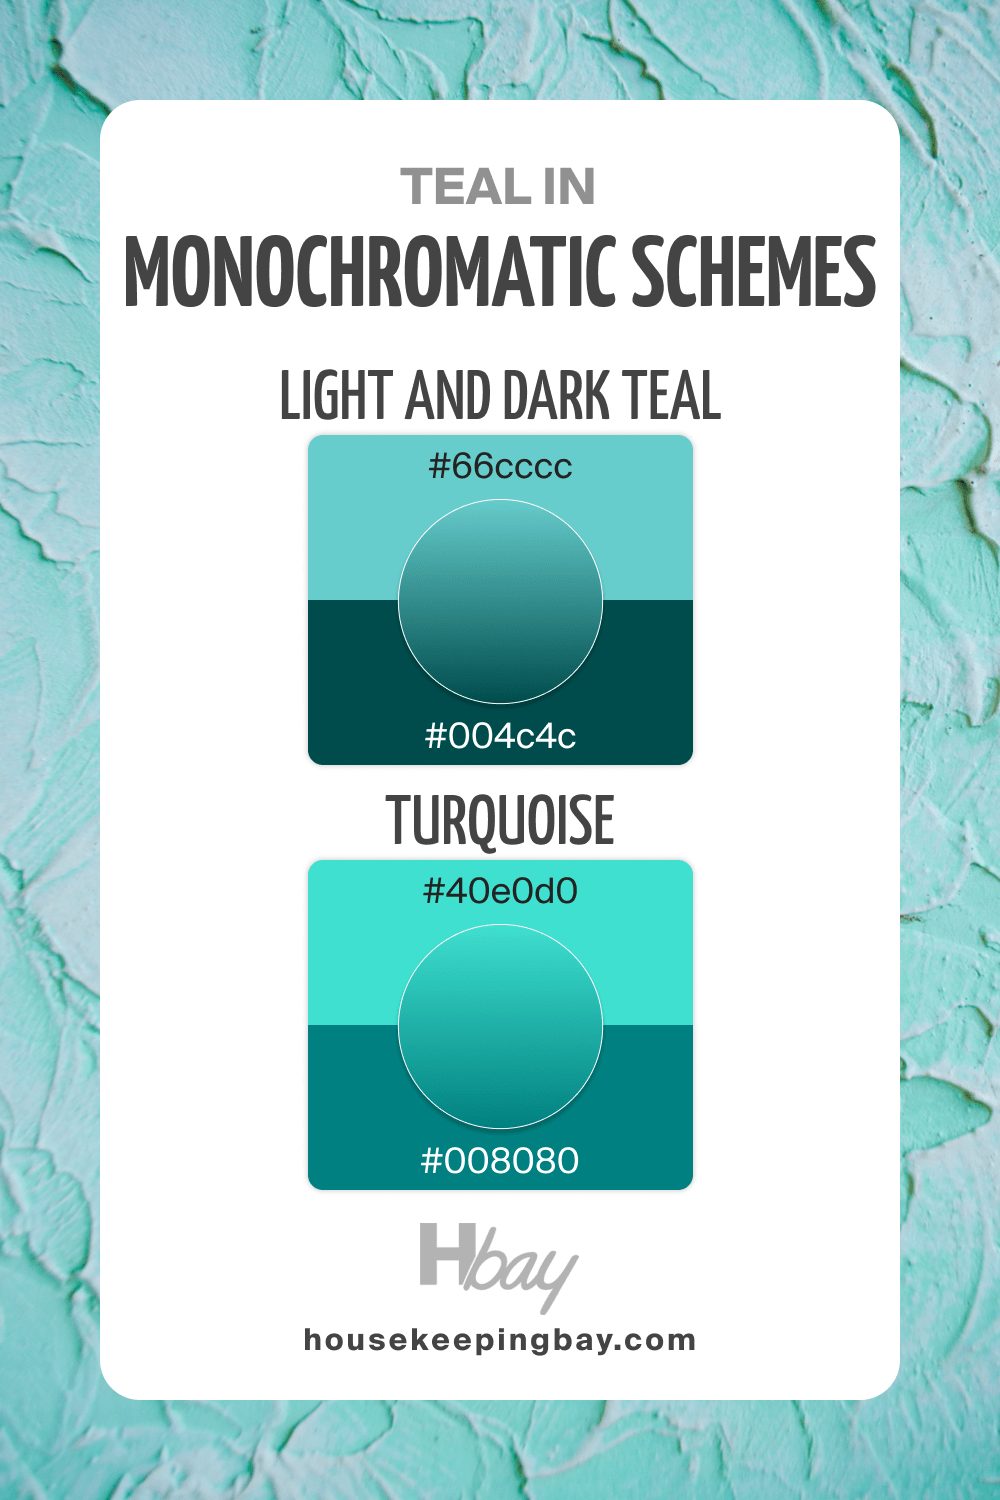 Teal in Monochromatic Schemes